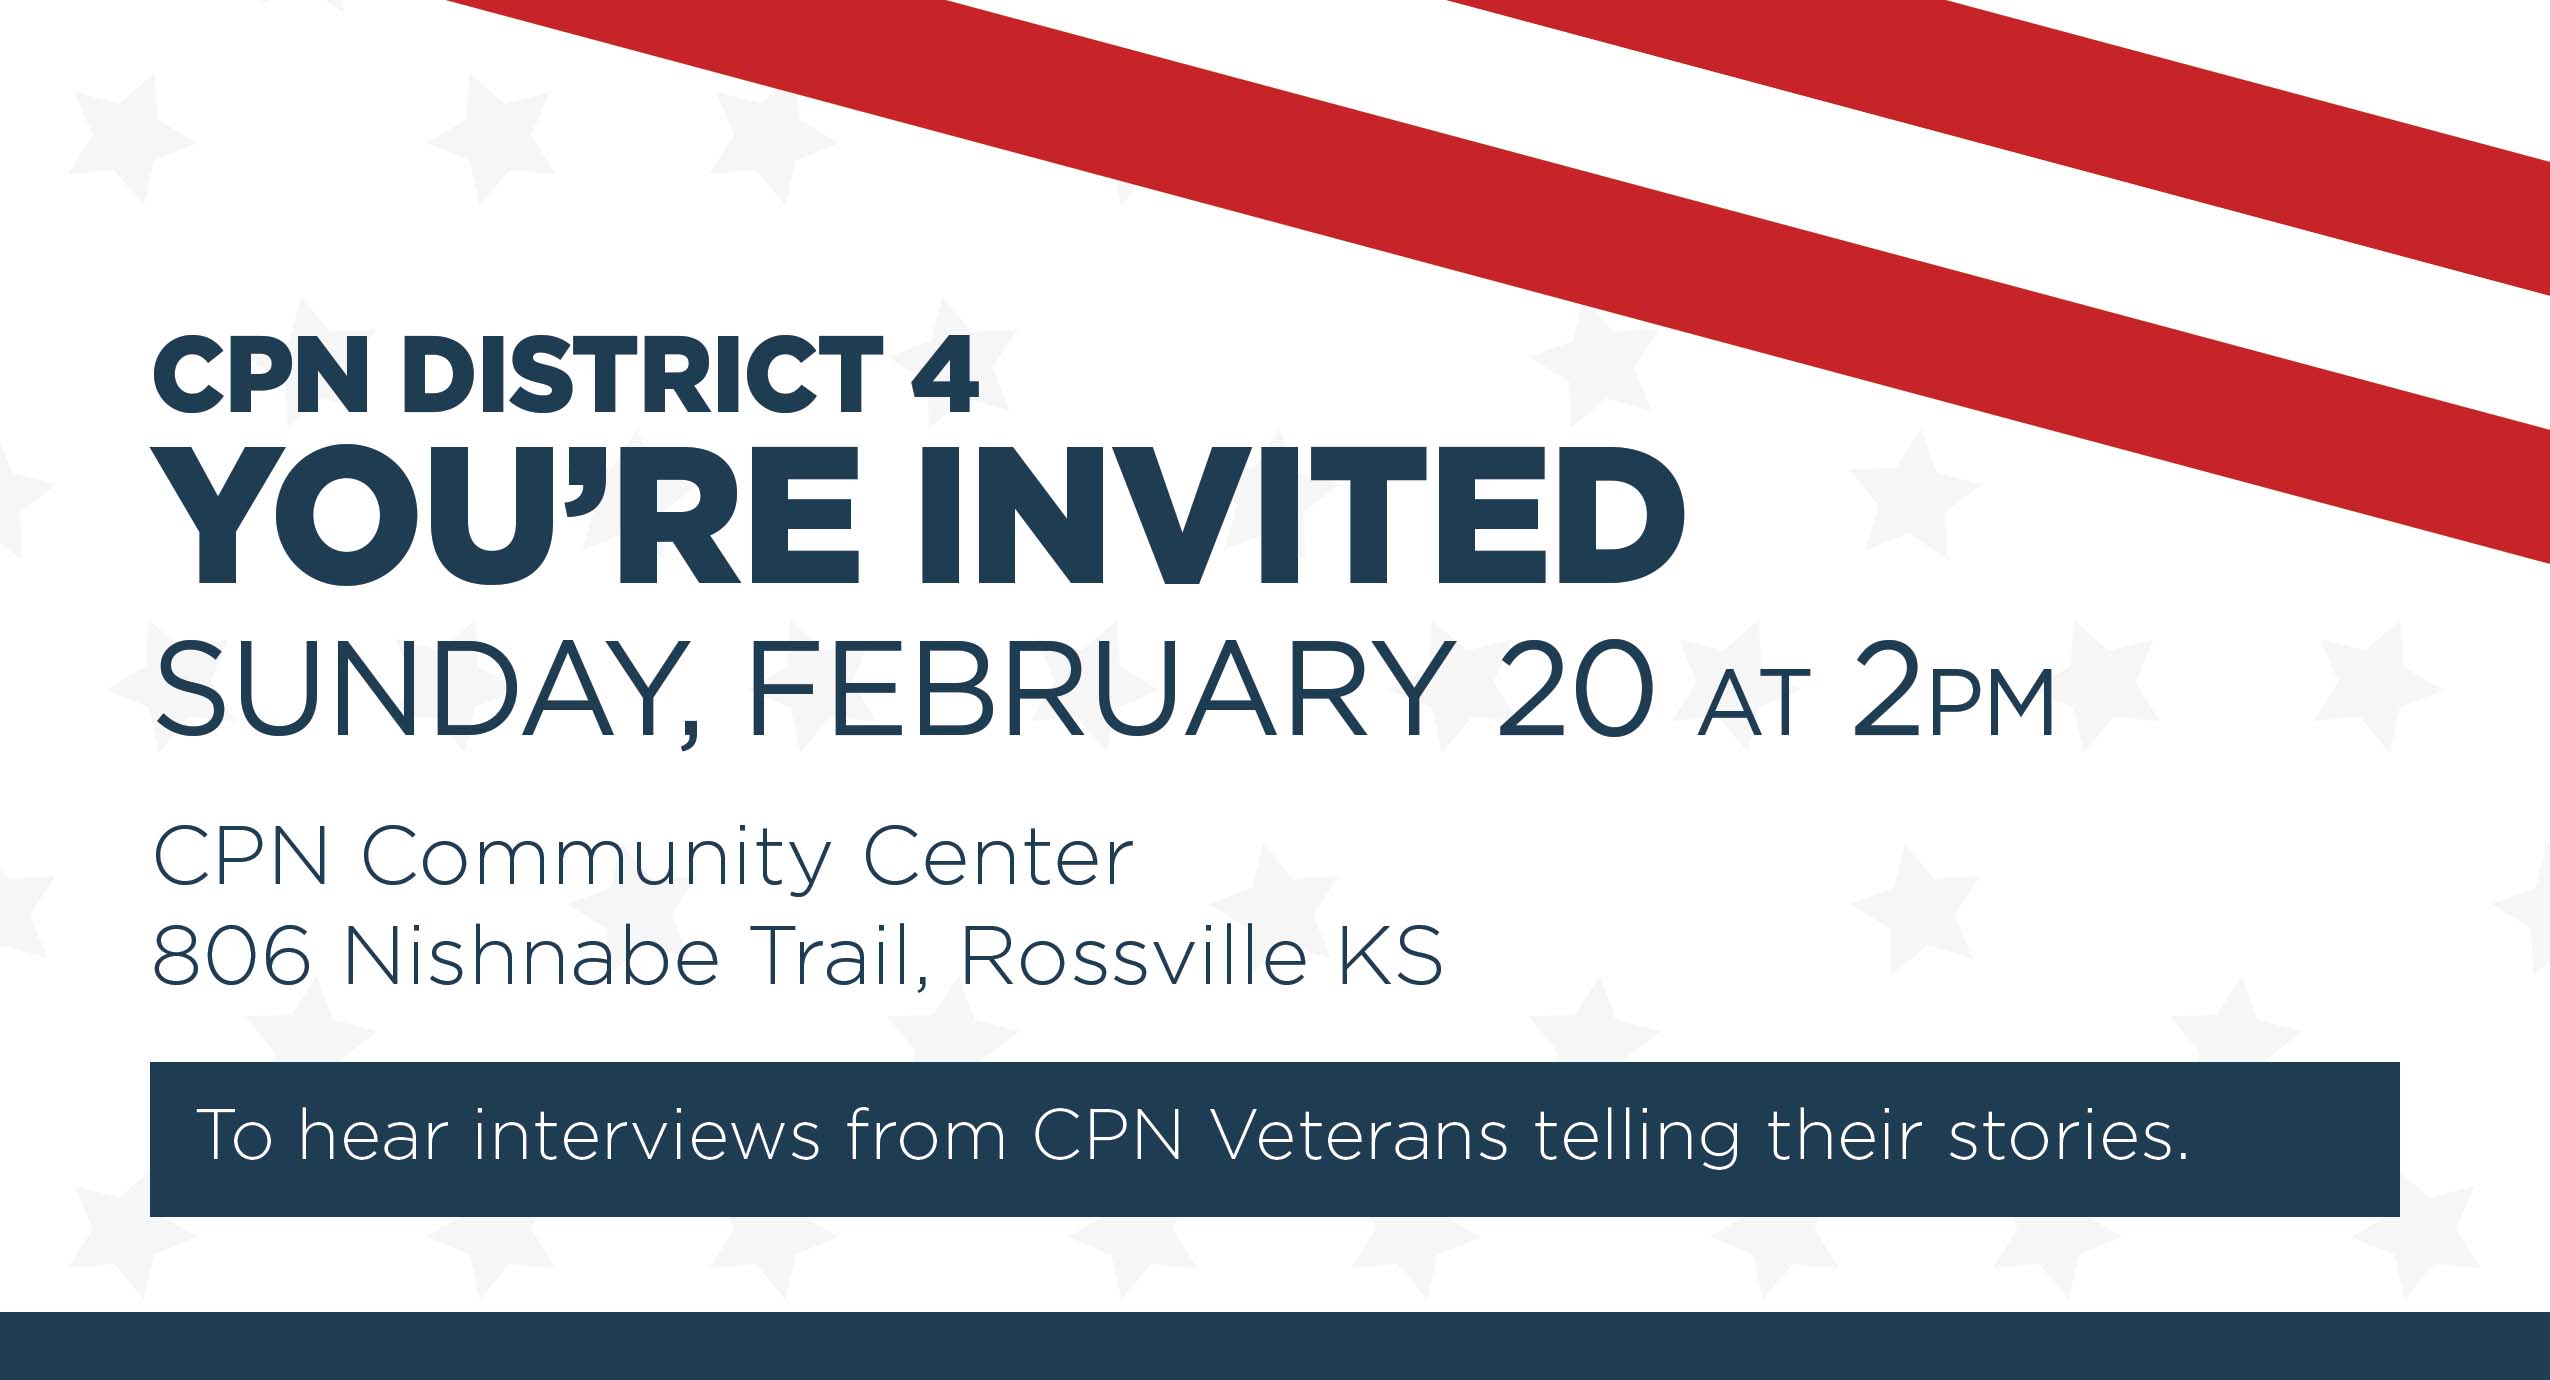 A white graphic with two red stripes at the top right corner invites you to CPN District 4's Community Center in Rossville, KS to hear interviews from CPN Veterans telling their stories. The event will be held on Sunday, February 20 at 2pm at 806 Nishnabe Trail, Rossville KS